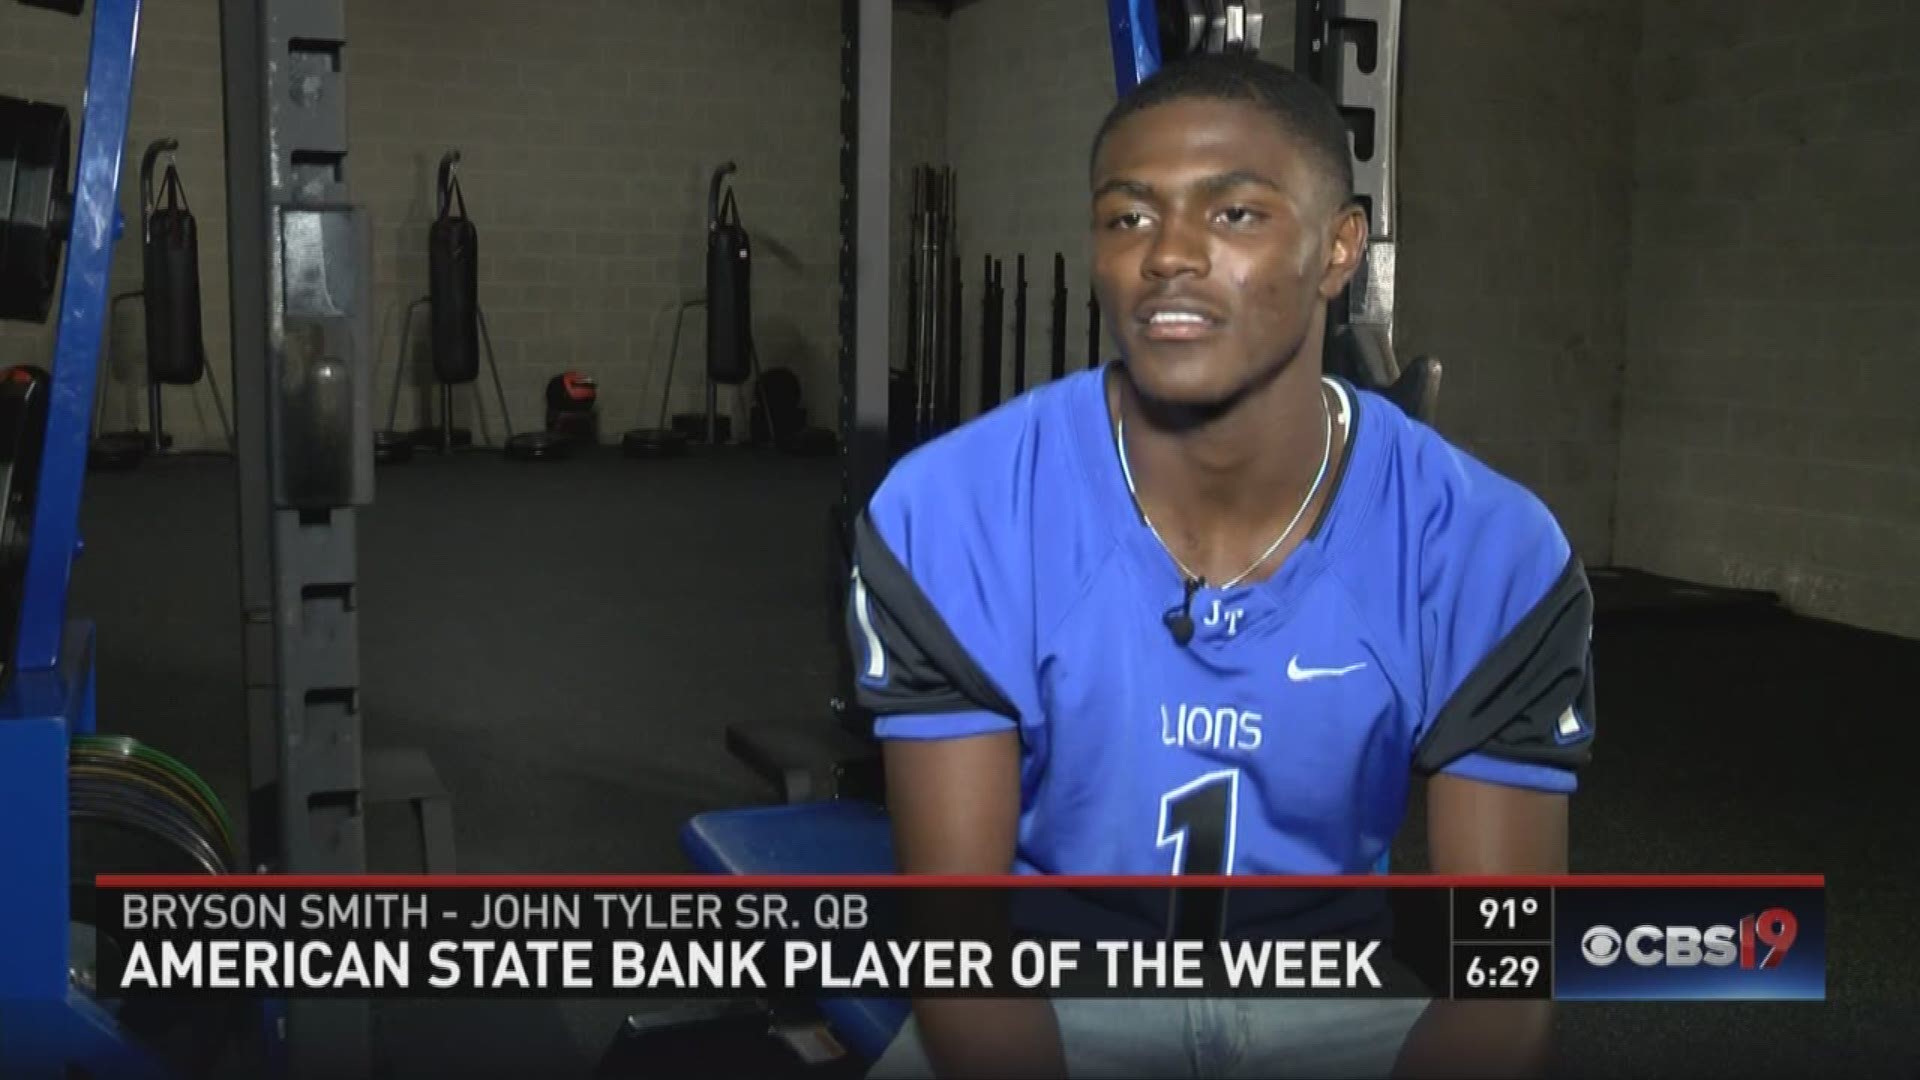 2016 Week 4 American State Bank Player of the Week: Bryson Smith